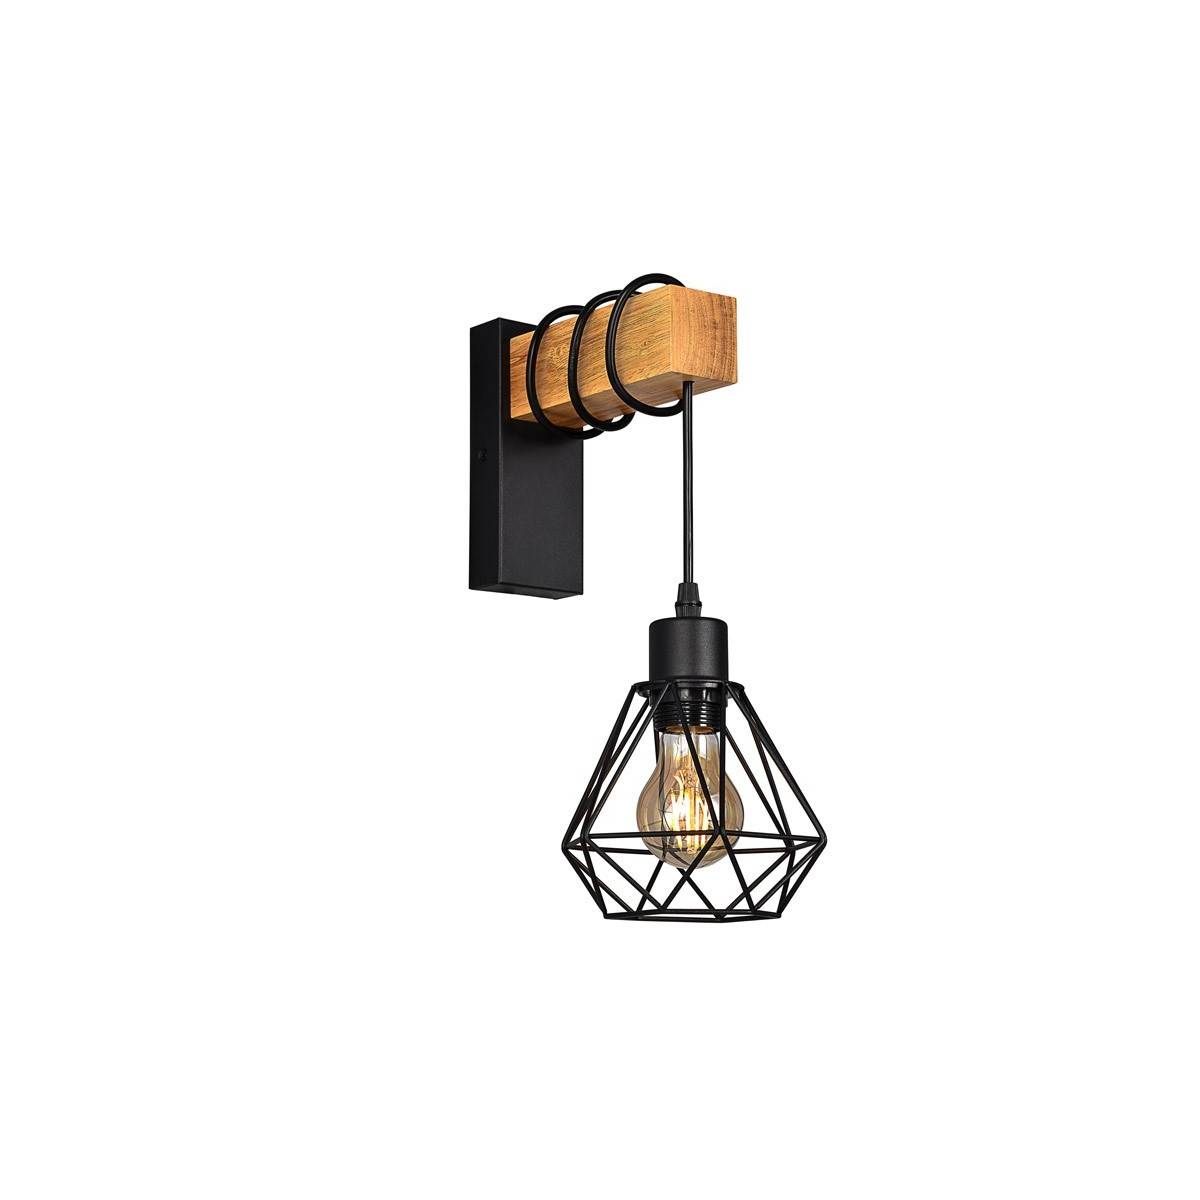 Wooden wall sconces metal cage "RODEN".